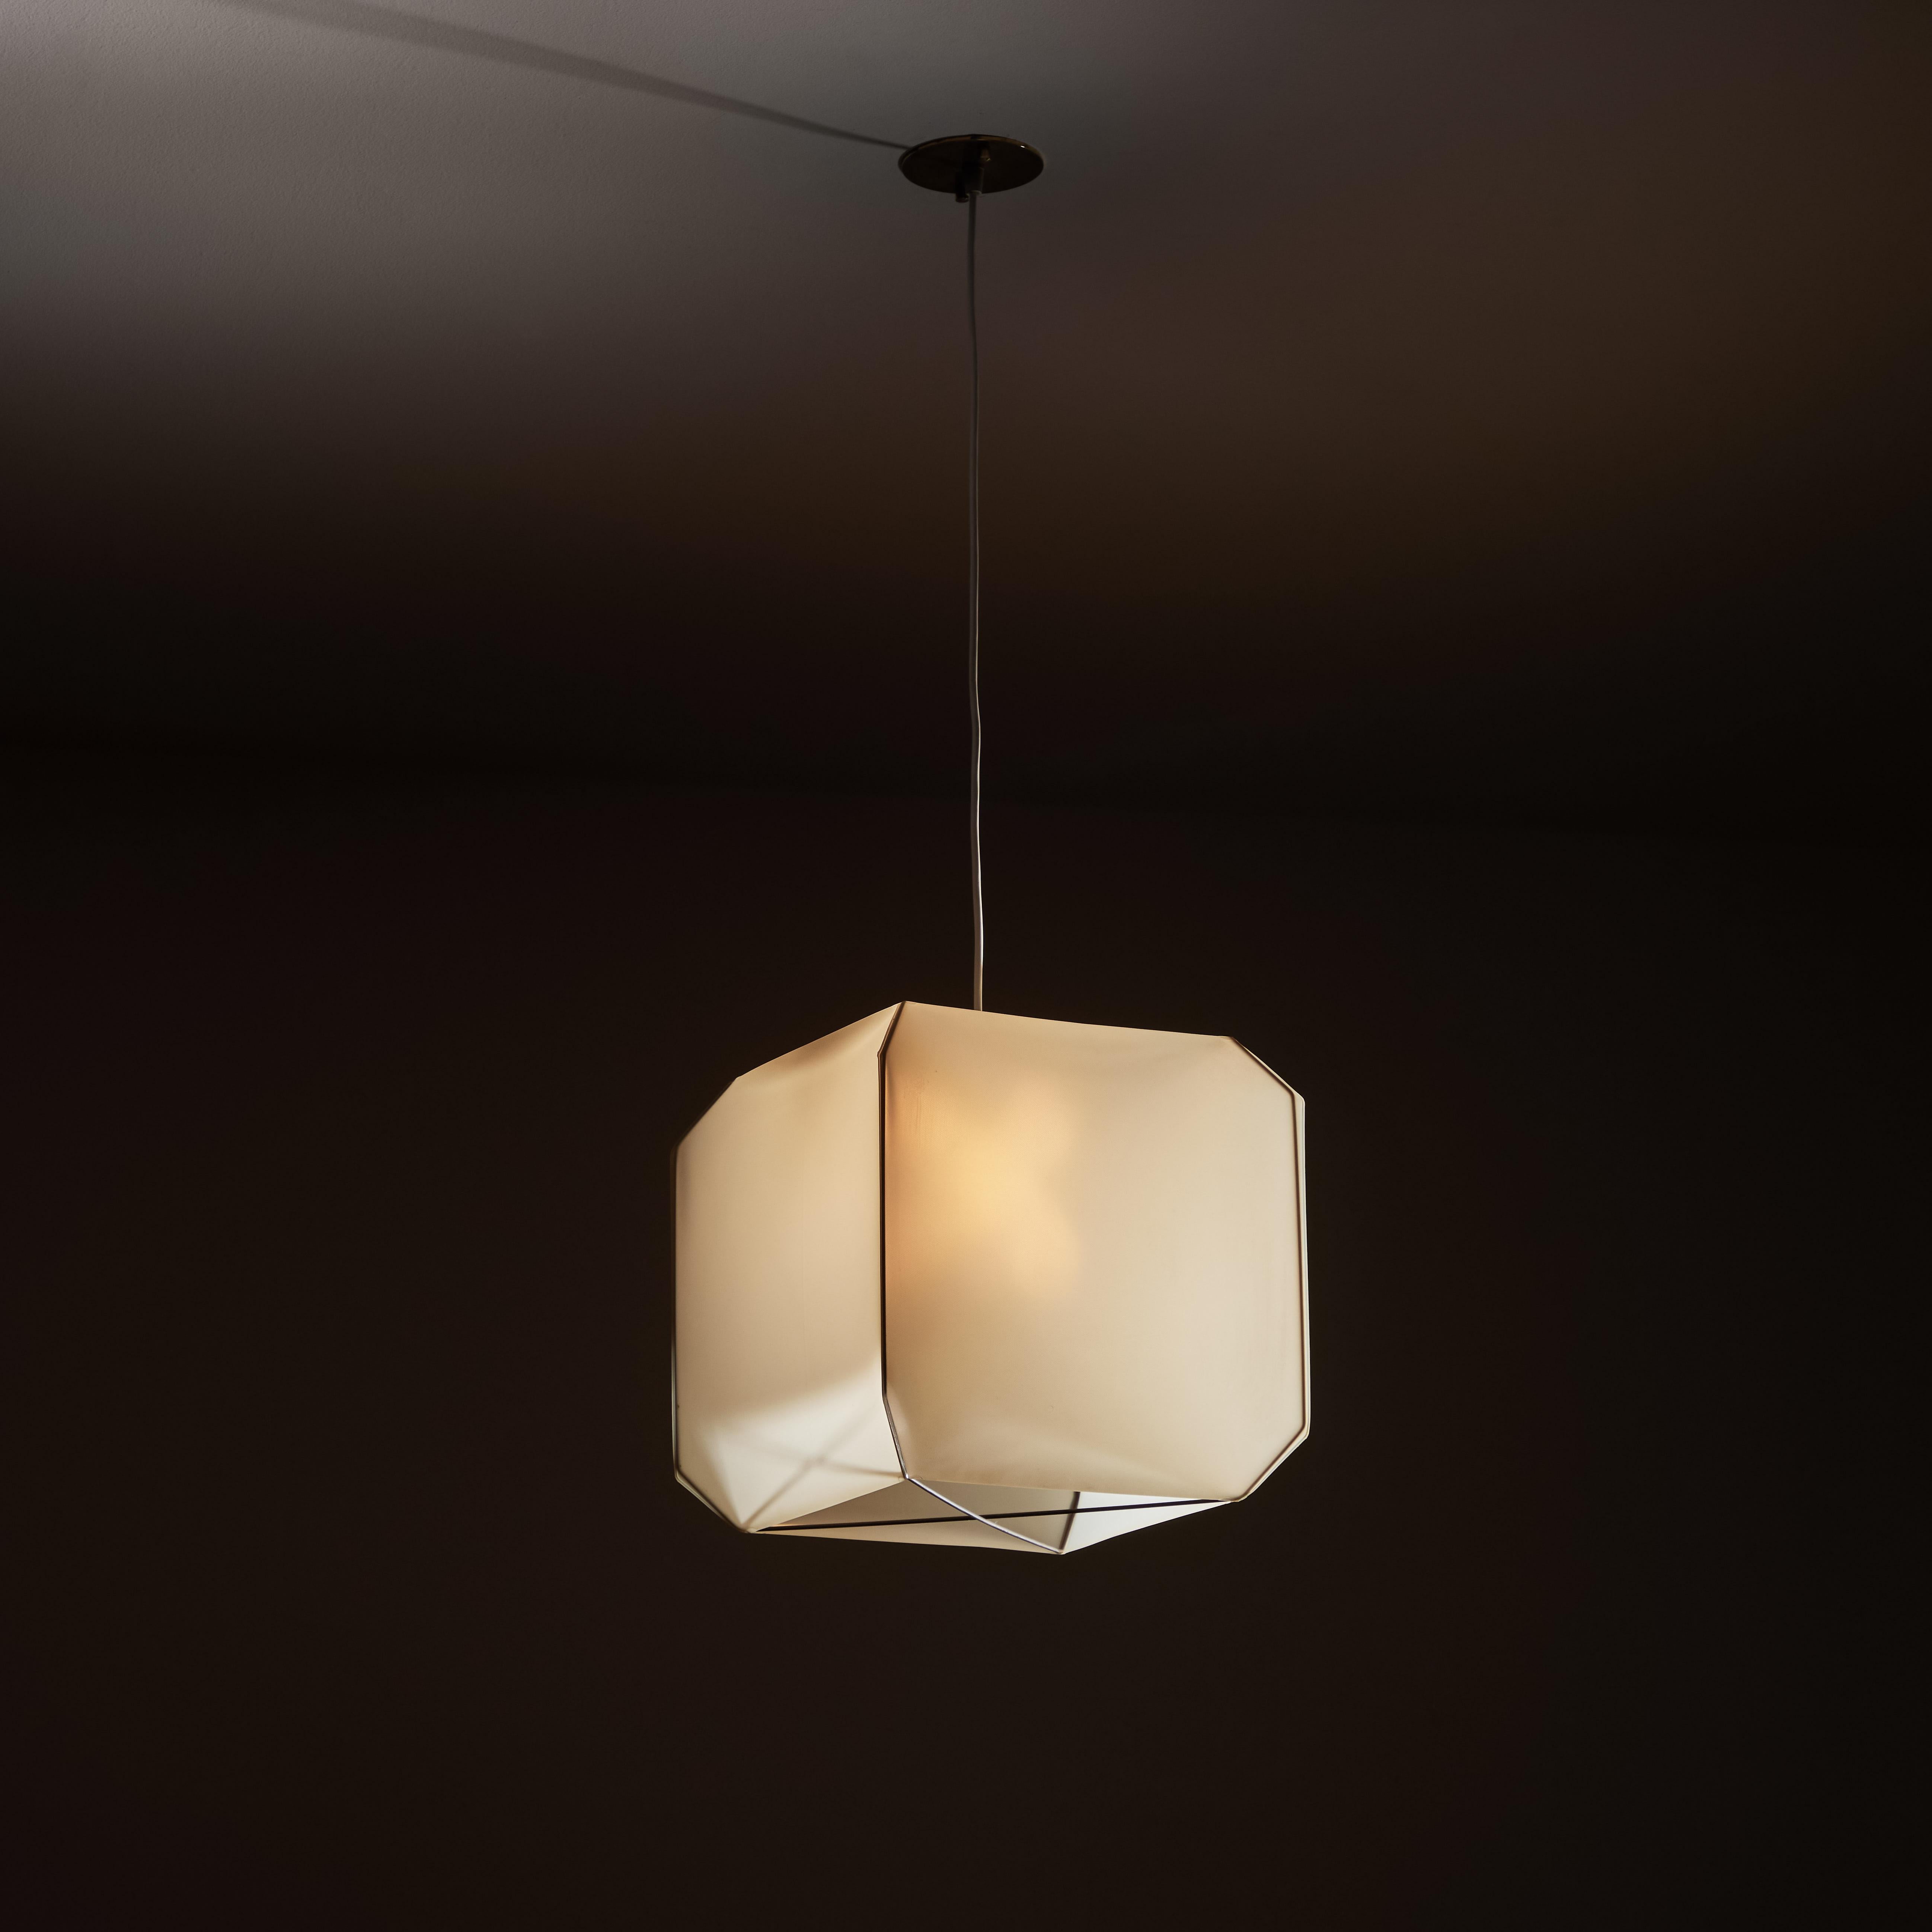 Bali suspension light by Bruno Munari for Danese Milano. Designed in Italy, 1958. Brass, metal, silk and acrylic. Wired for US standards. Custom brass ceiling plate. We recommend one Edison 40w maximum bulb per light. Bulbs provided as a one time